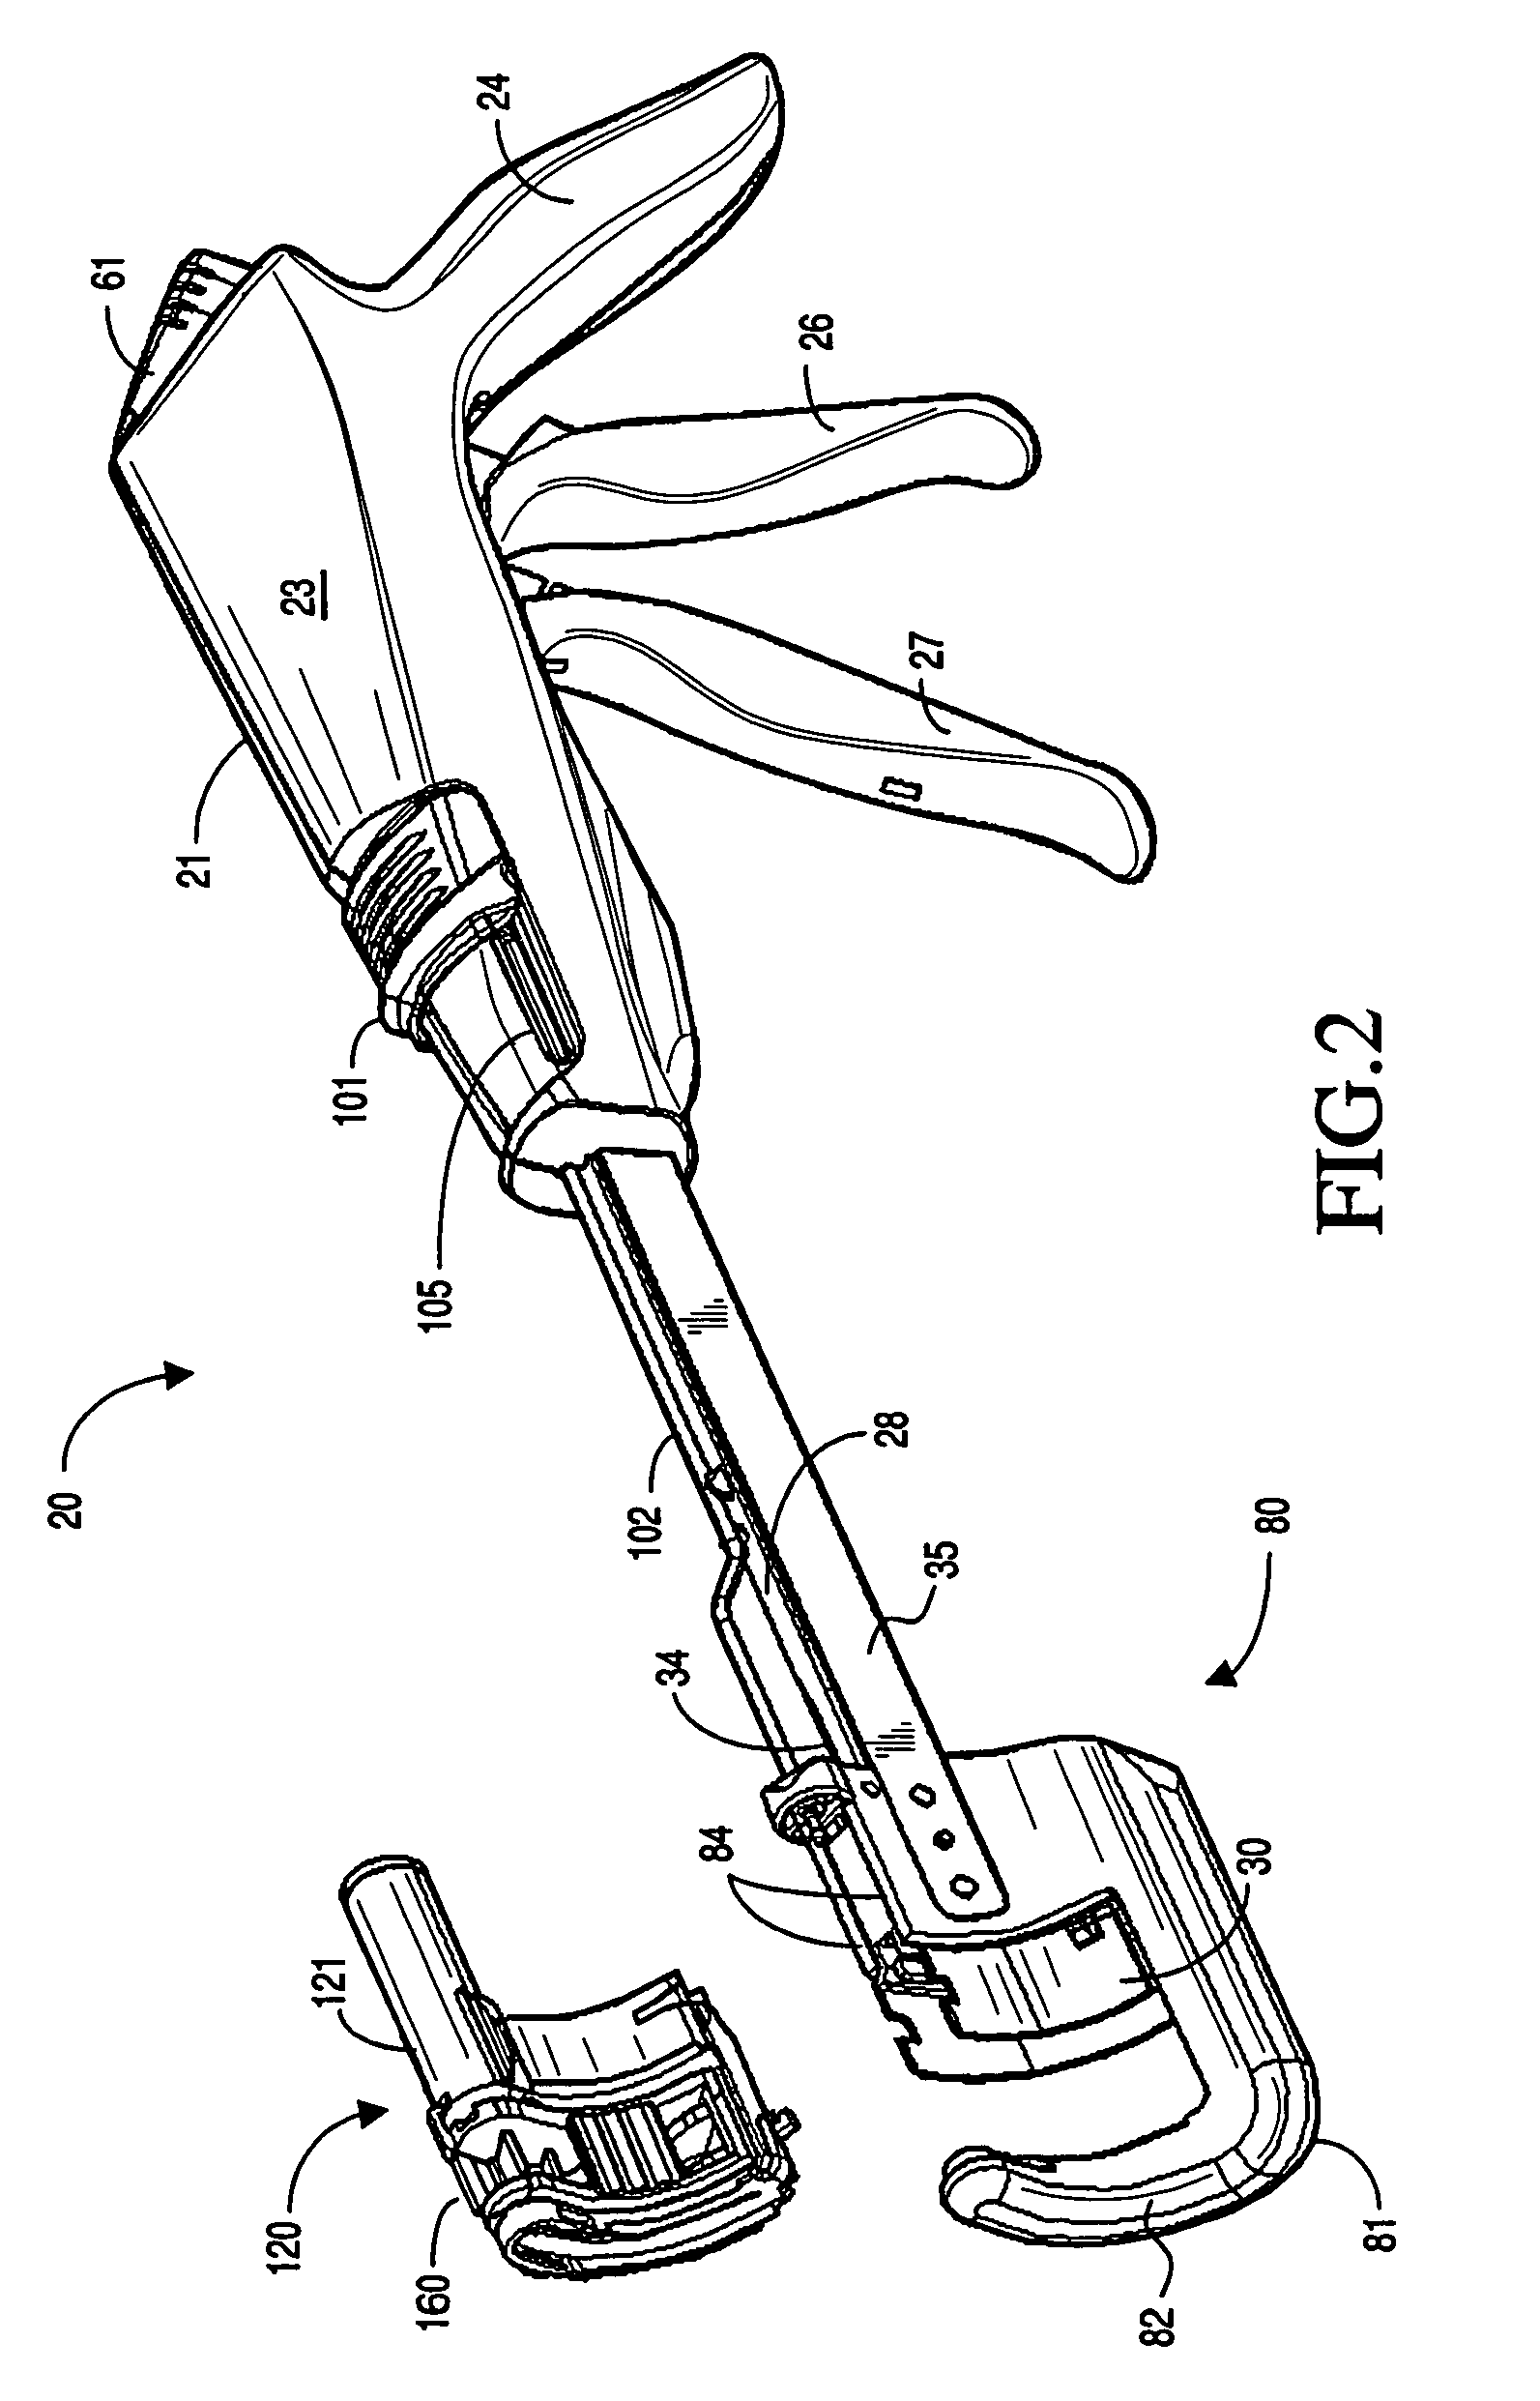 Cartridge retainer for a curved cutter stapler